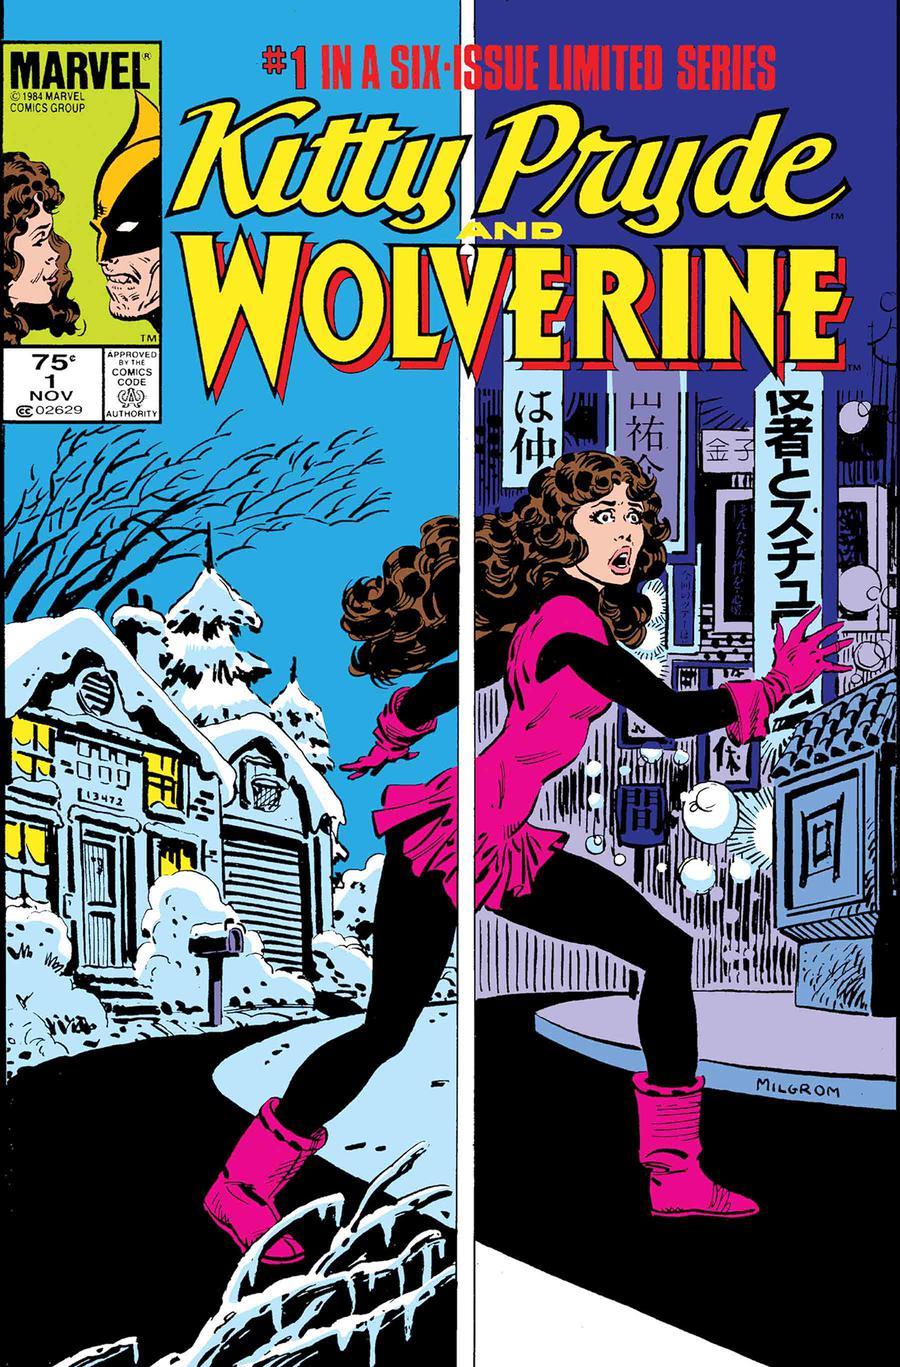 True Believers Kitty Pryde And Wolverine Vol. 1 #1